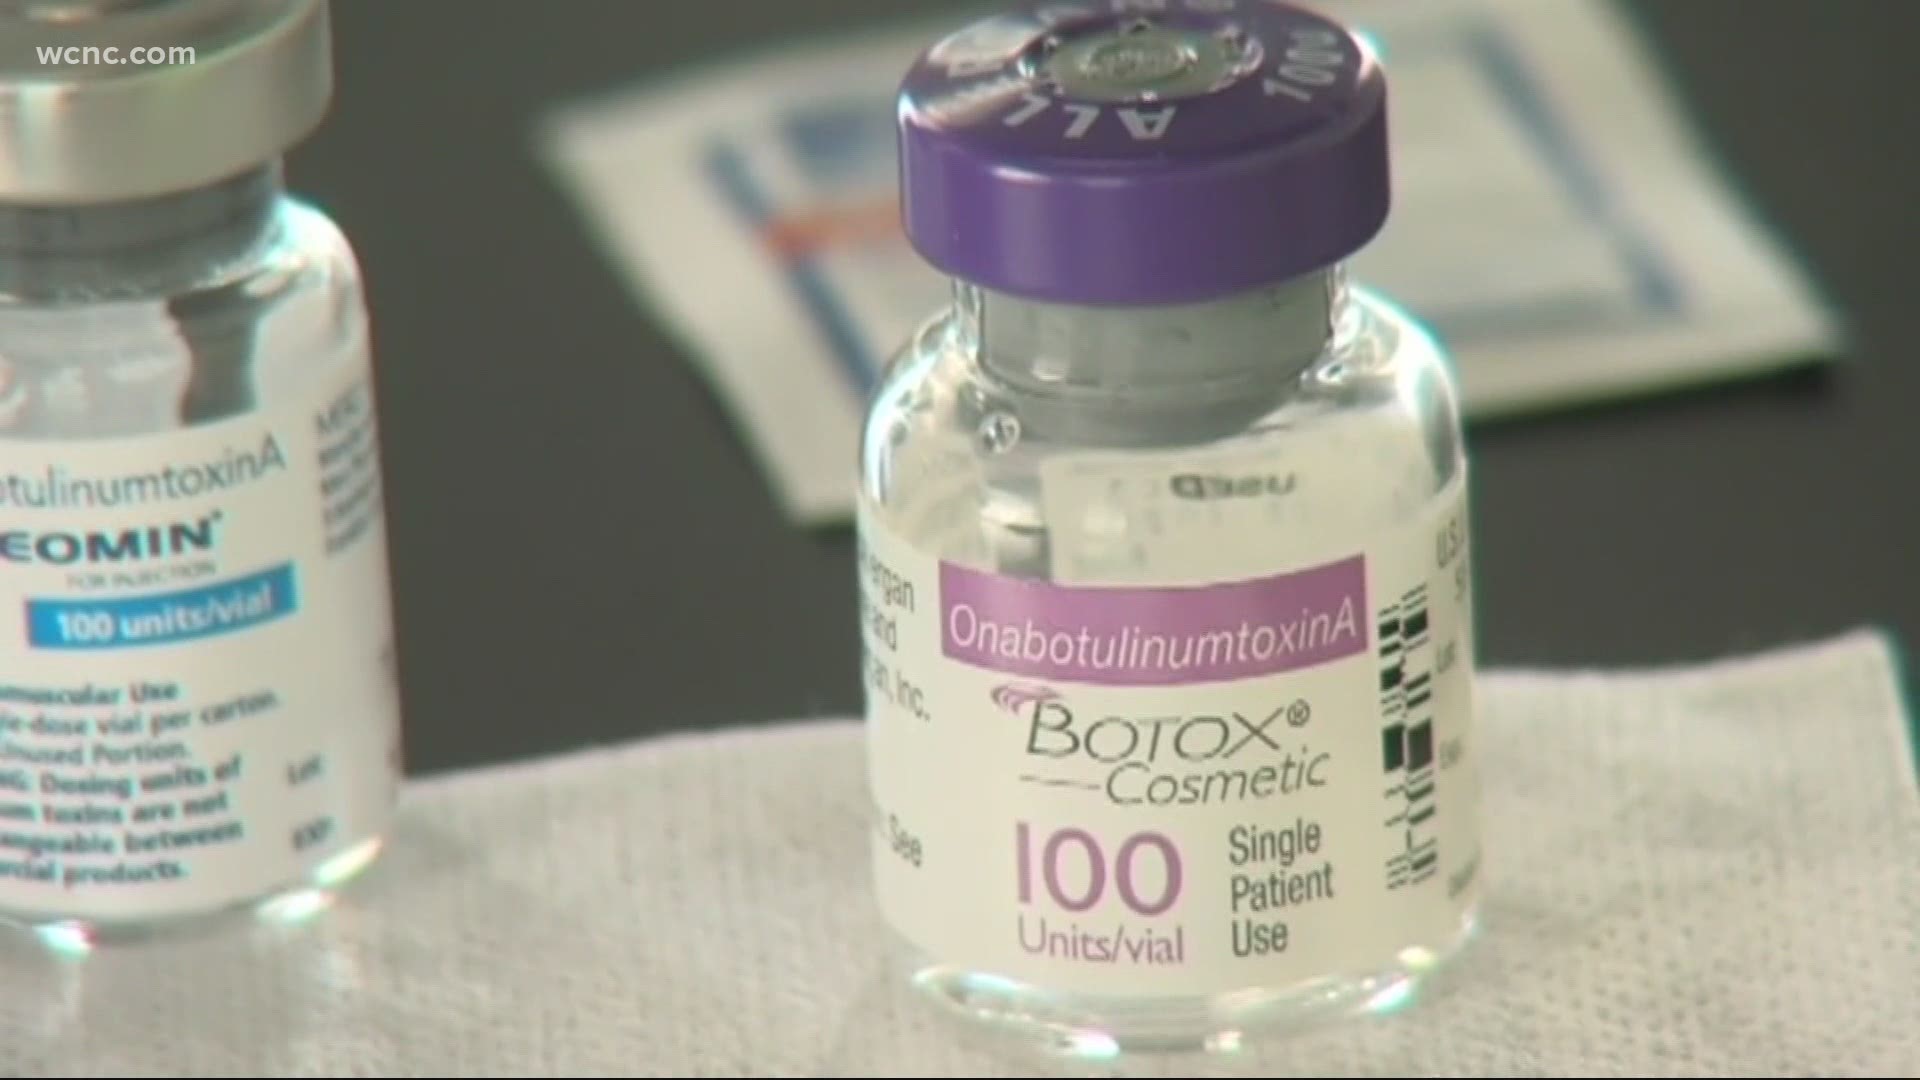 The StarMed chief medical officer said Botox specialists are trained to get every drop out of the vial because of the high cost of the product.